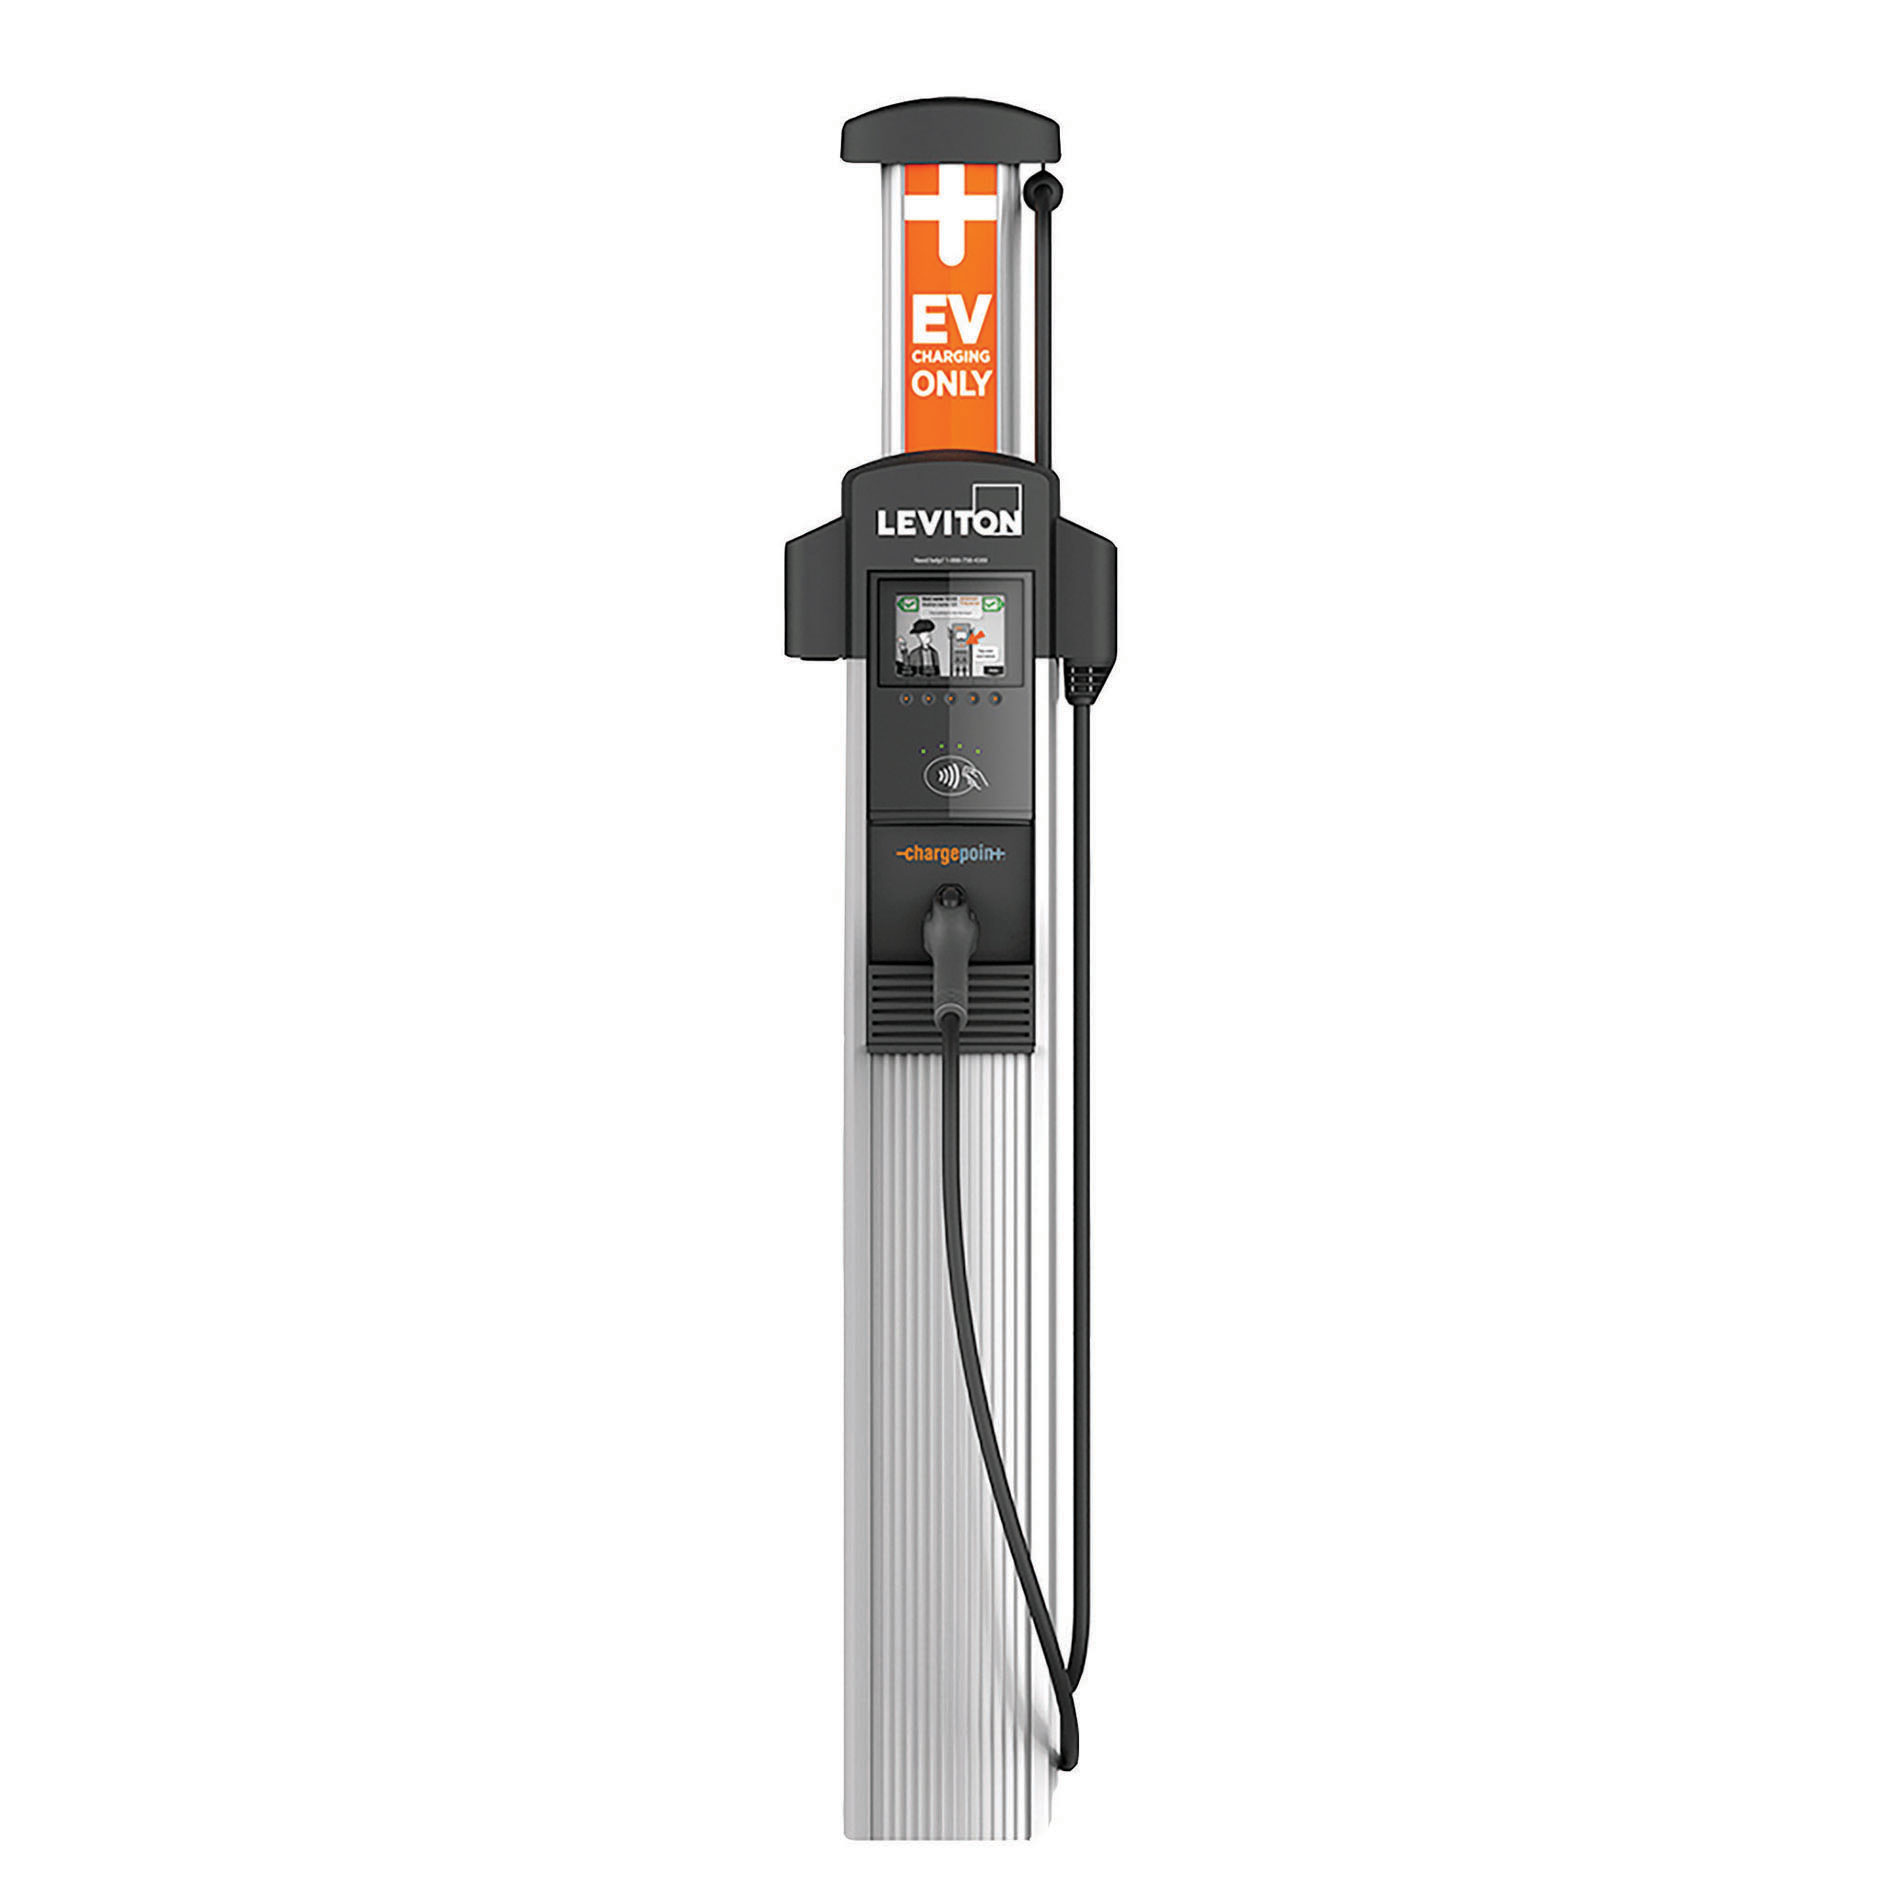 Black, gray and orange EV charger stand with Leviton logo. Image by Leviton.